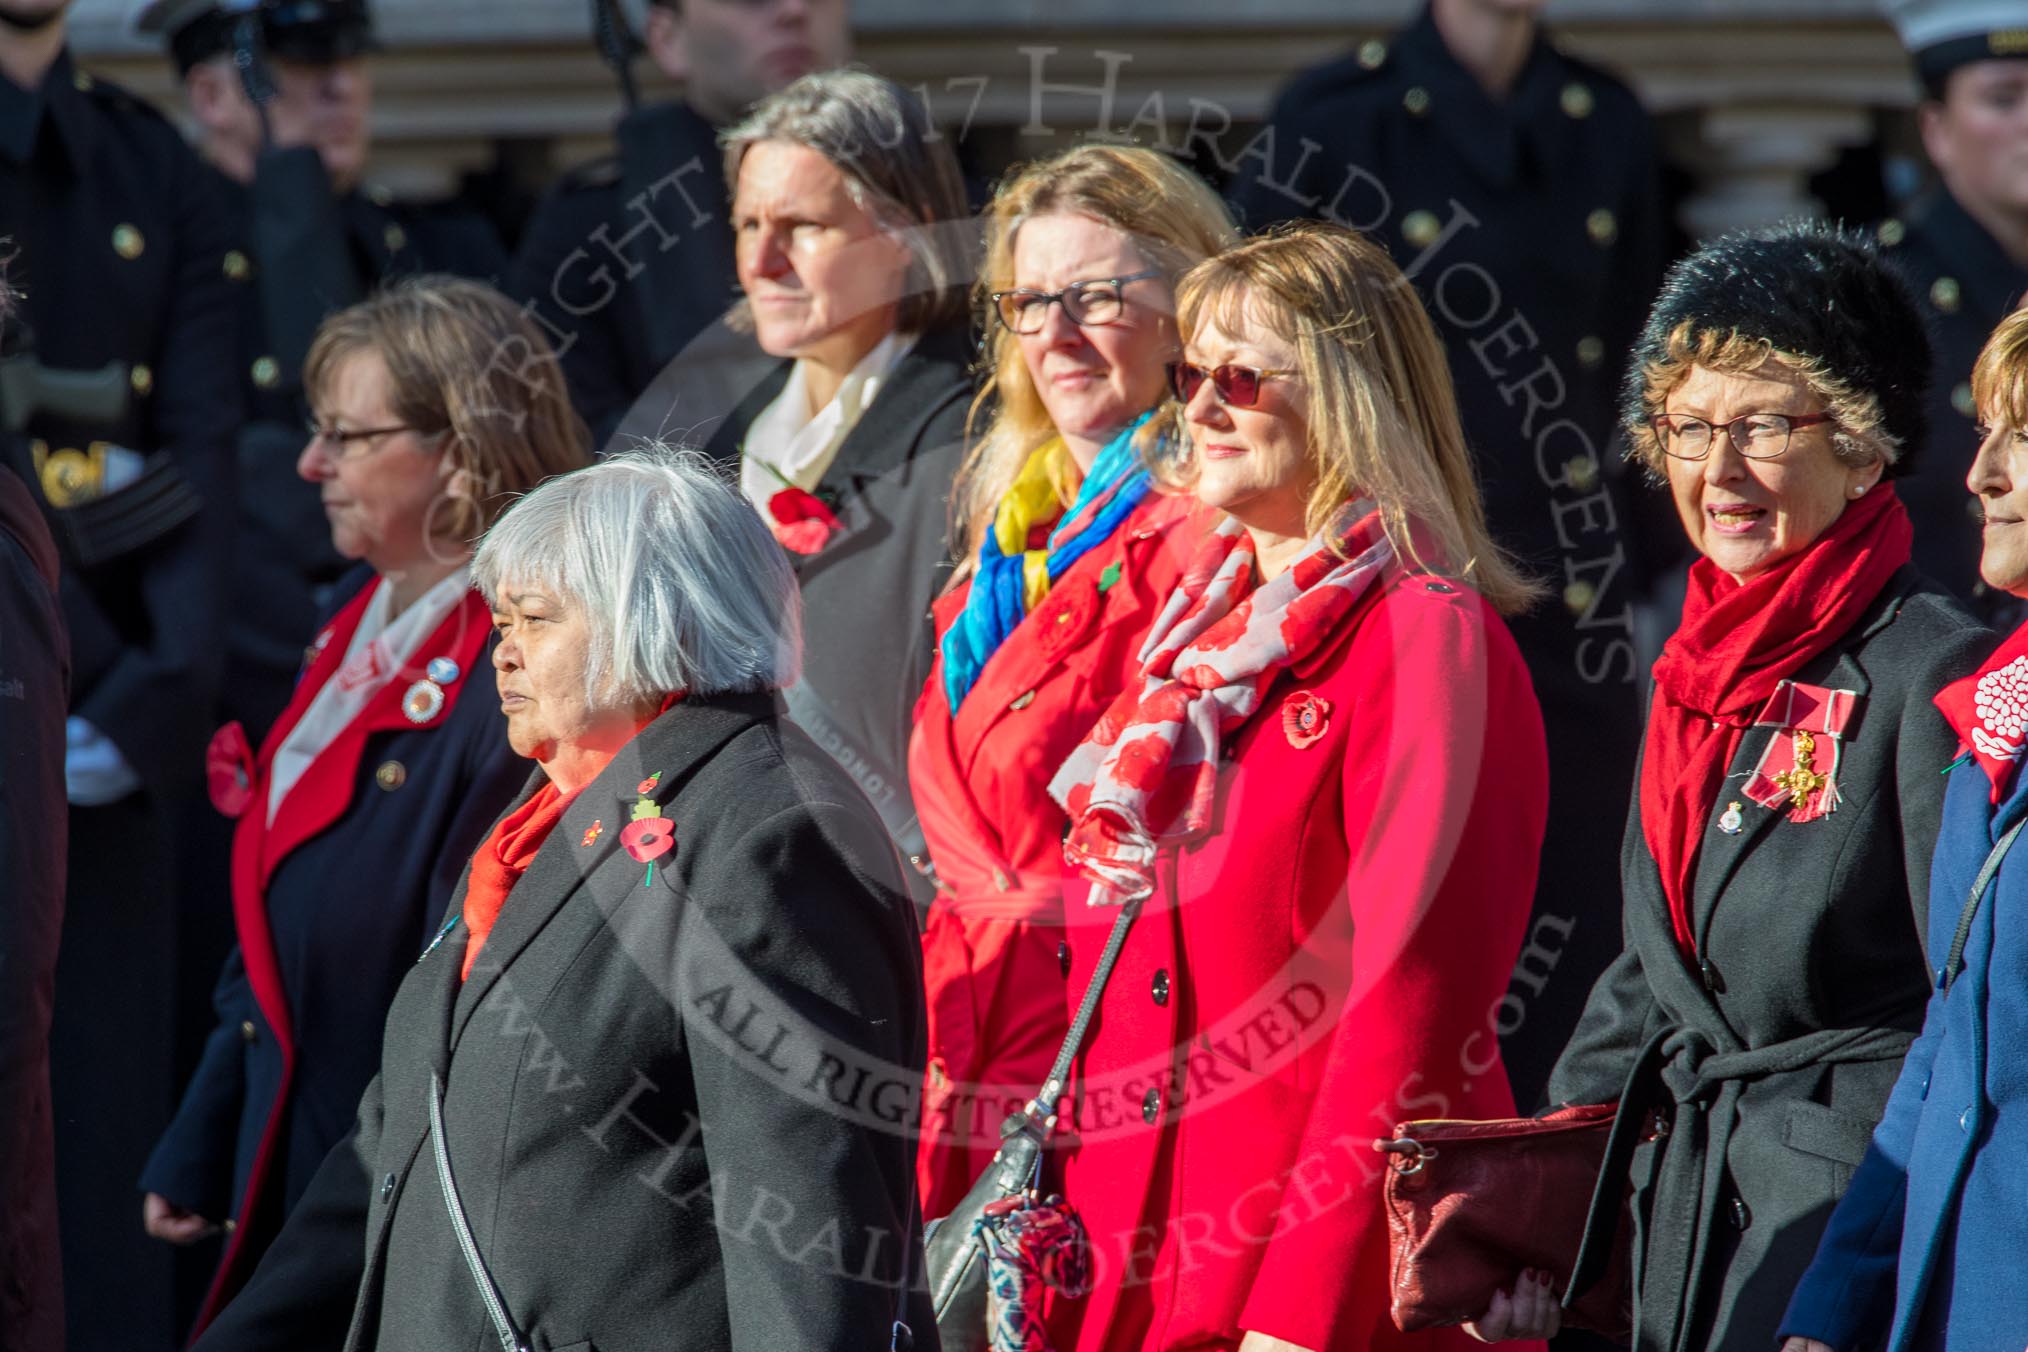 Army Widows Association  (Group D9, 17 members) during the Royal British Legion March Past on Remembrance Sunday at the Cenotaph, Whitehall, Westminster, London, 11 November 2018, 12:21.